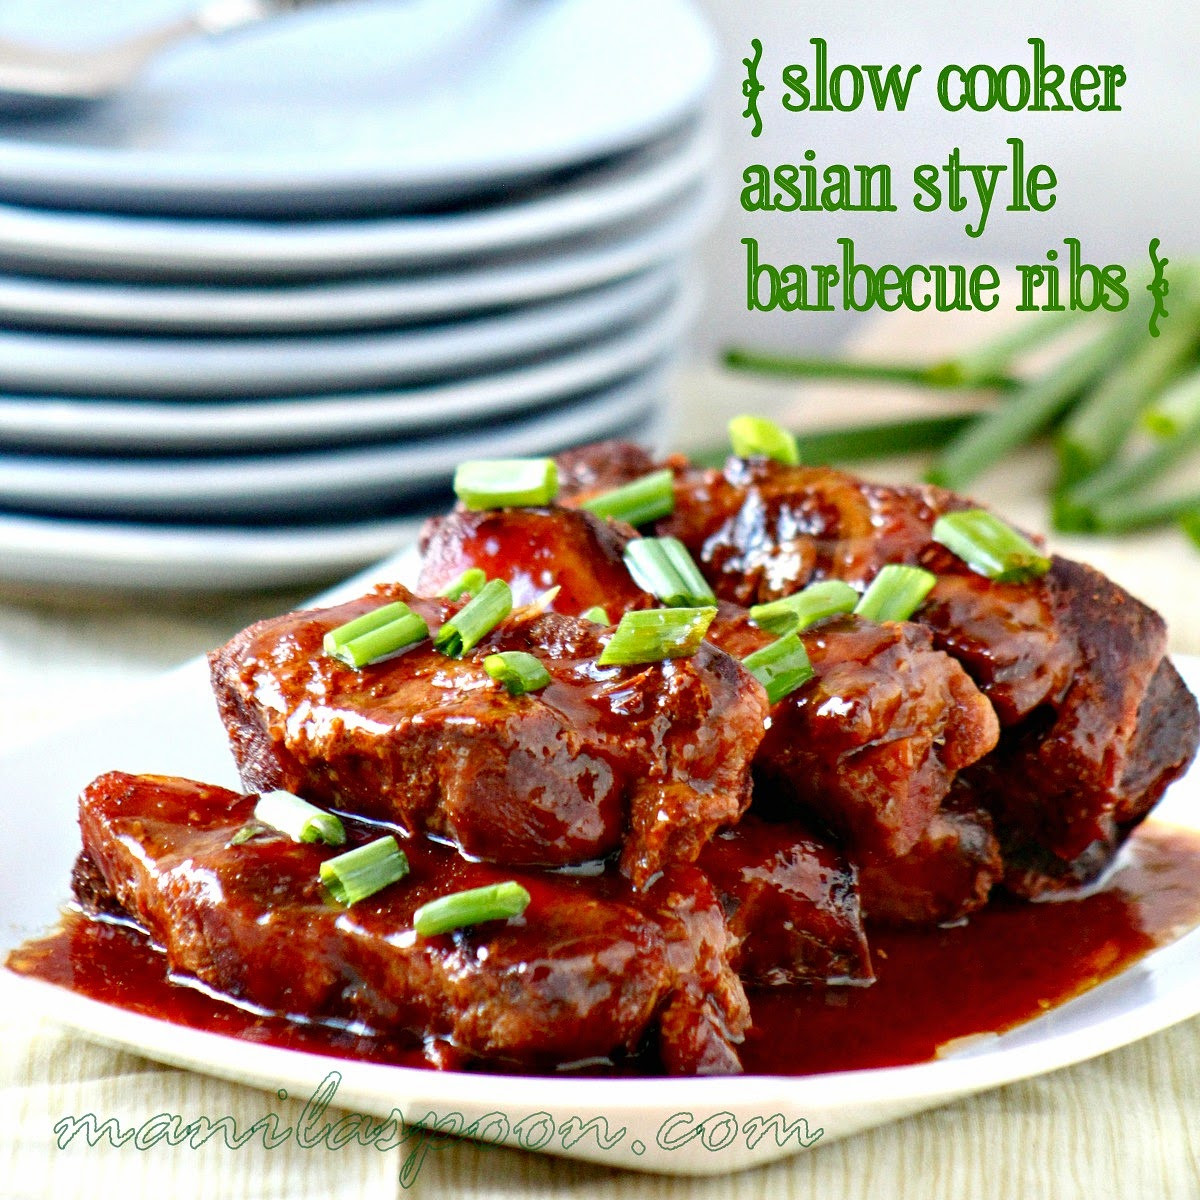 Pork Ribs Slow Cooker
 Slow Cooker Asian Barbecue Ribs